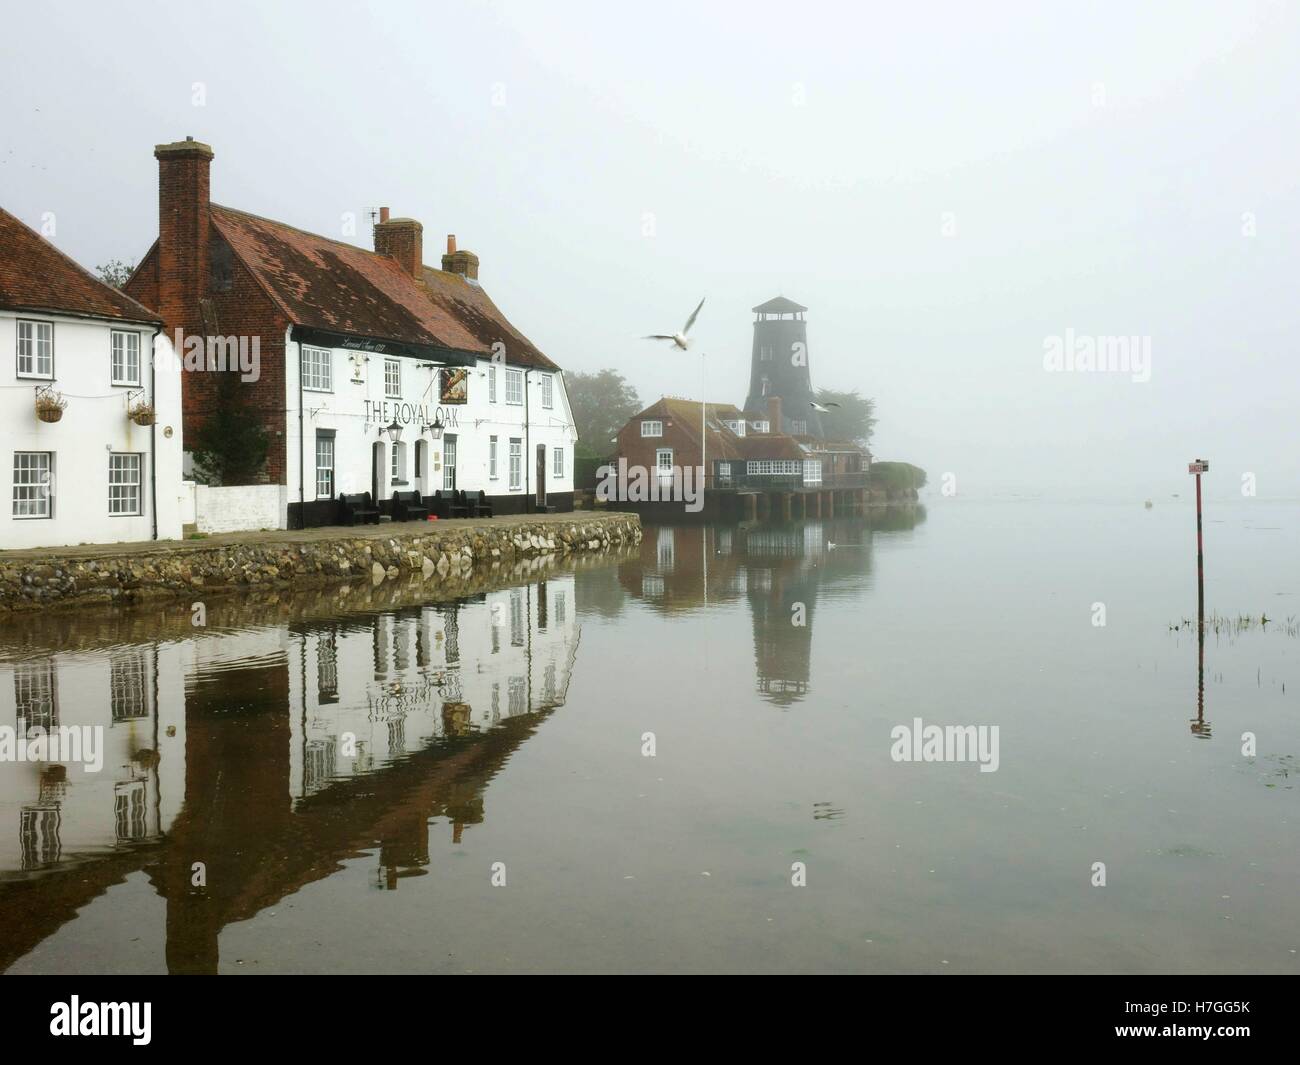 The Royal Oak traditional English pub and mill on a misty morning with reflections. Langstone Harbour, Havant, Hampshire, UK Stock Photo